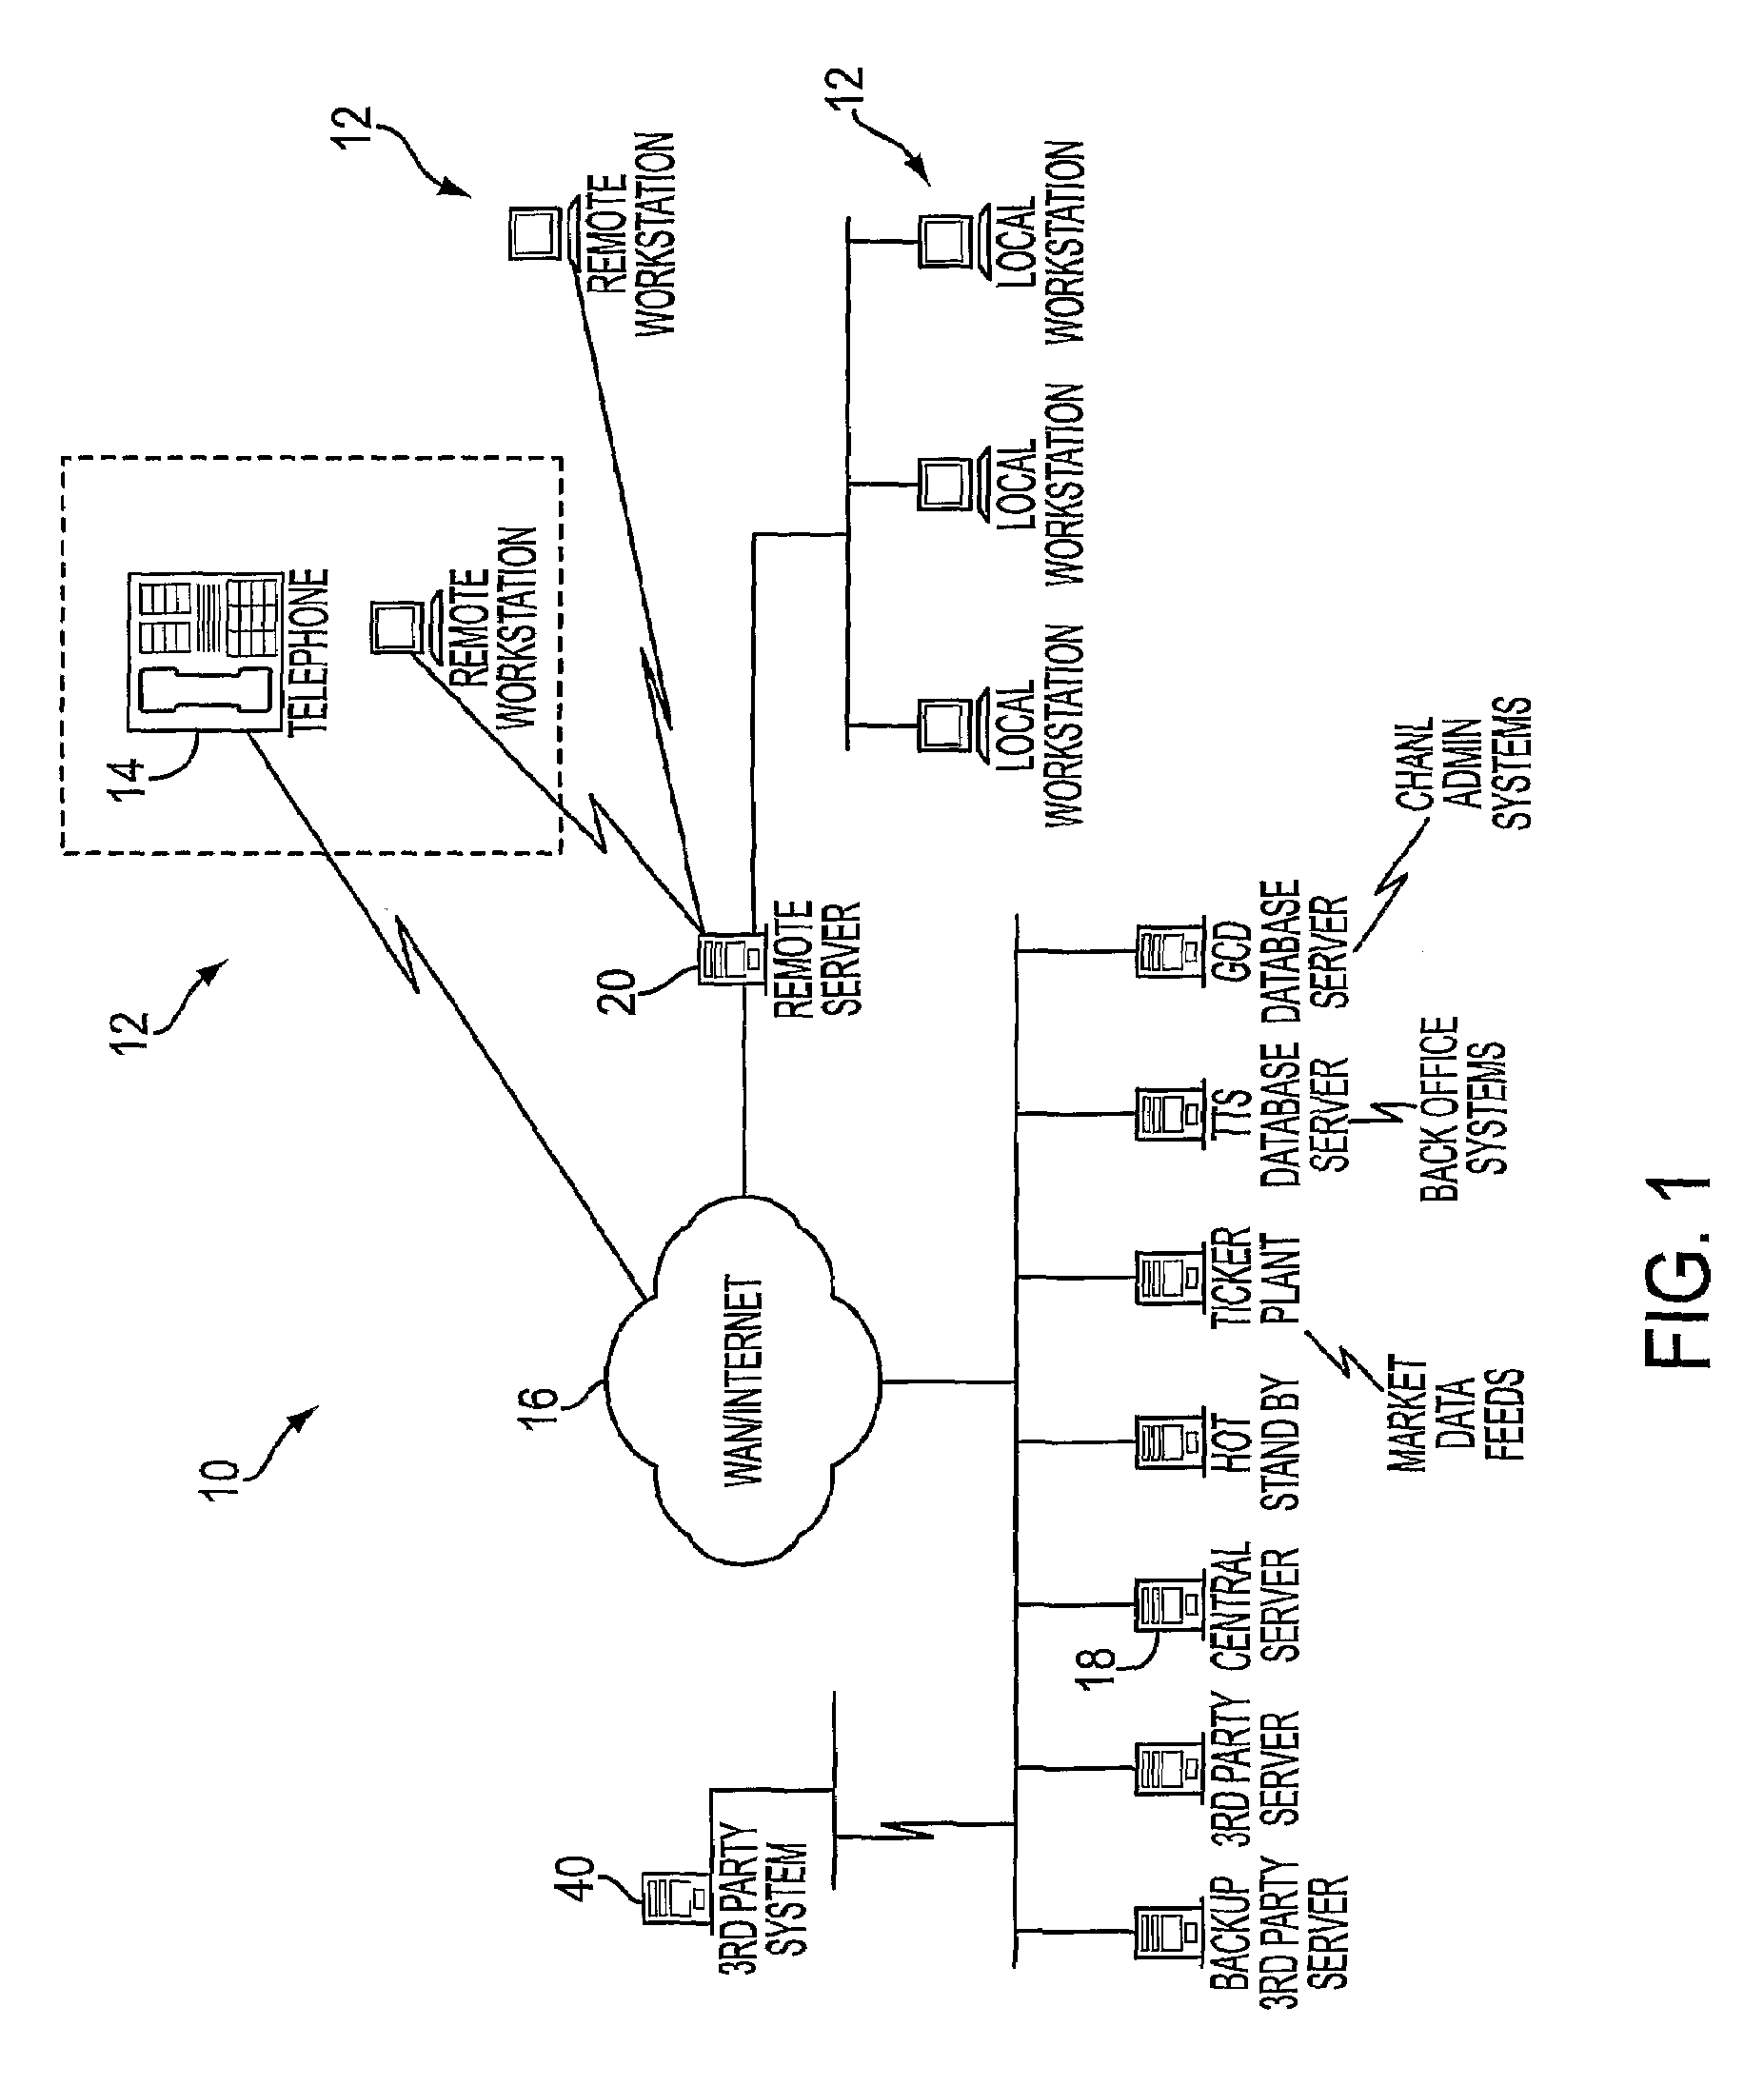 System and method for implementing foreign exchange currency forwards